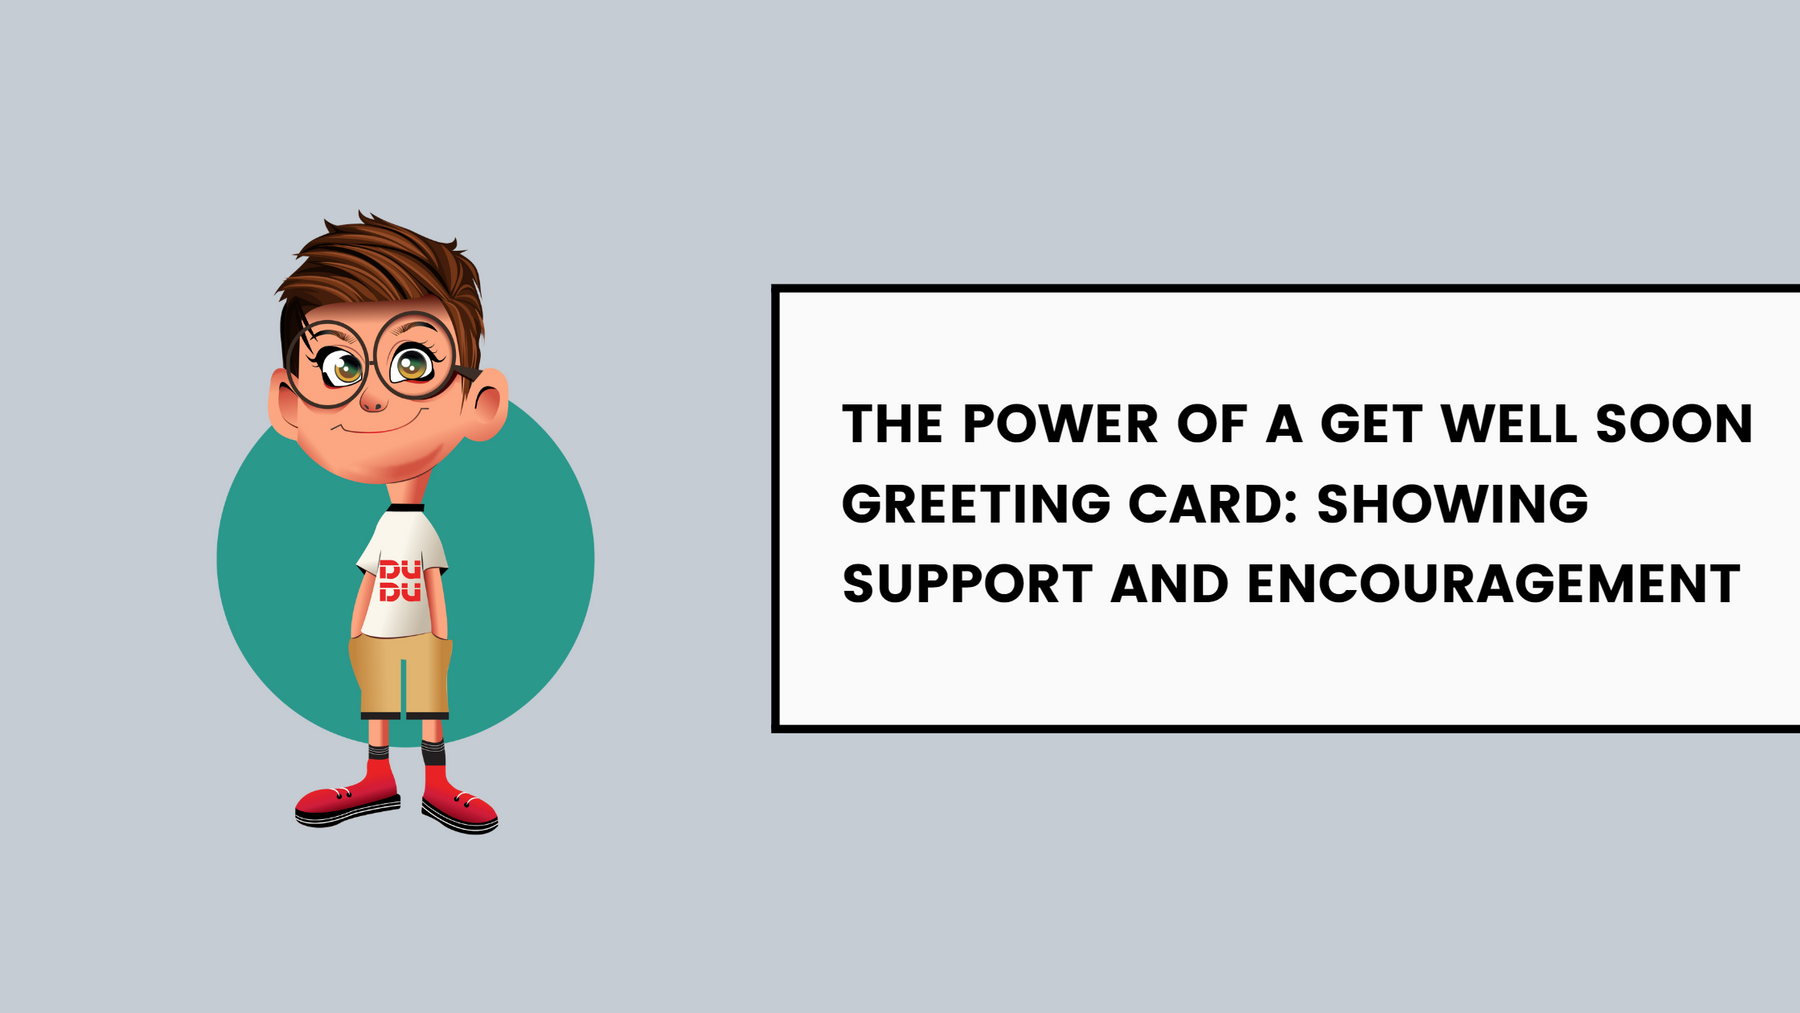 The Power of a Get Well Soon Greeting Card: Showing Support and Encouragement